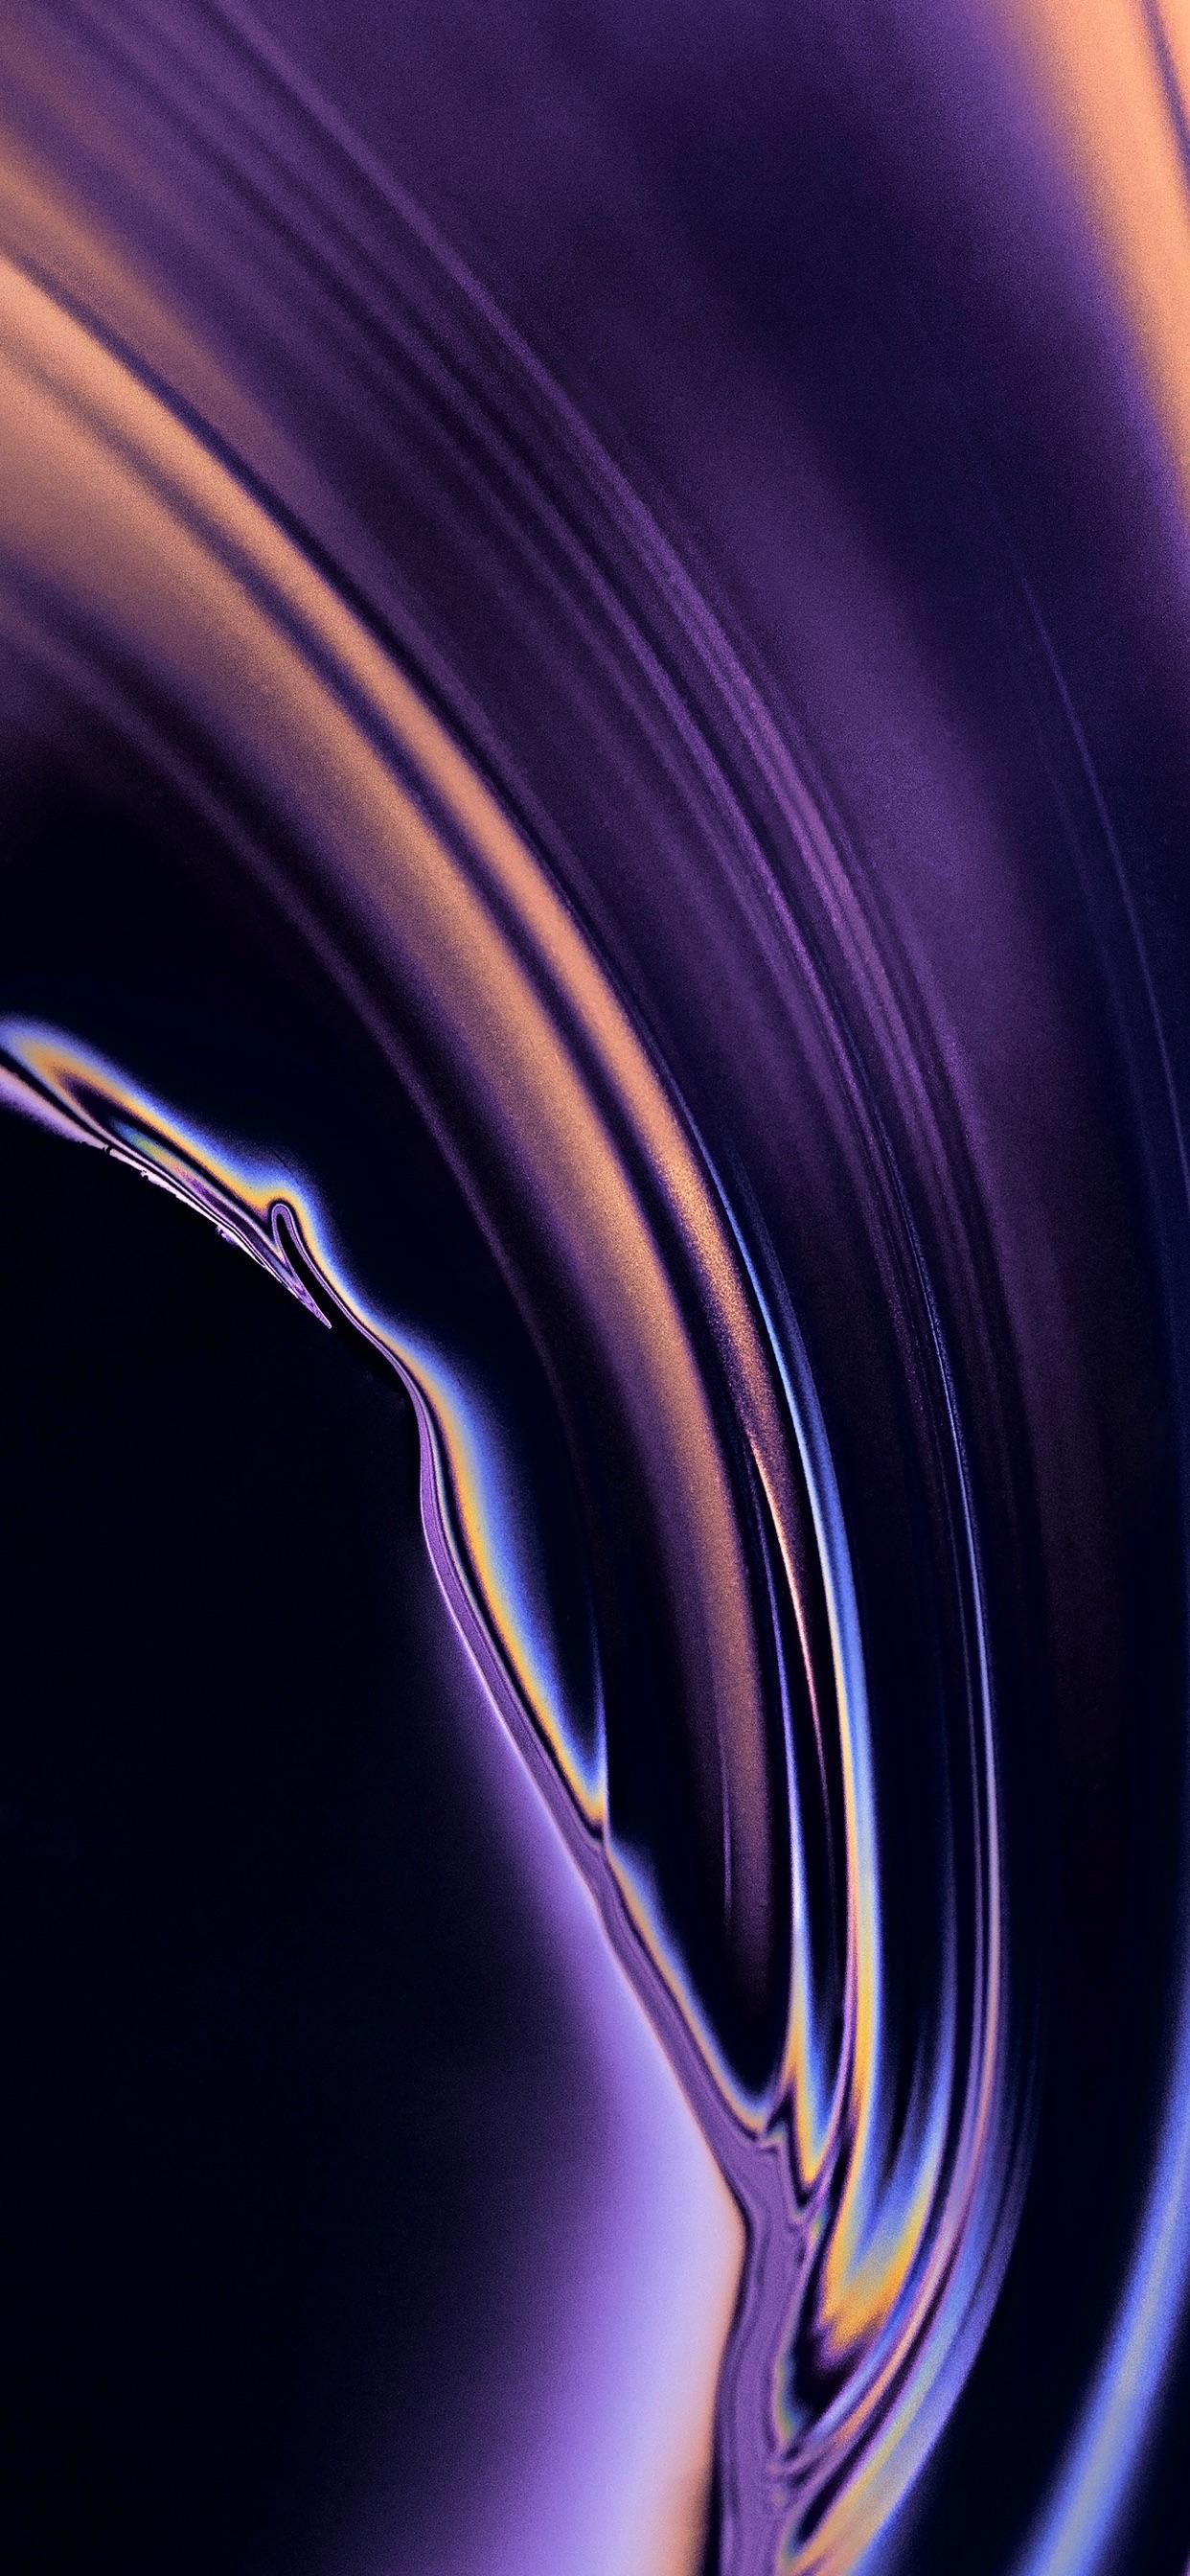 Wallpaper Weekends: Abstract iPhone Wallpaper From the macOS Desktop Picture Folder